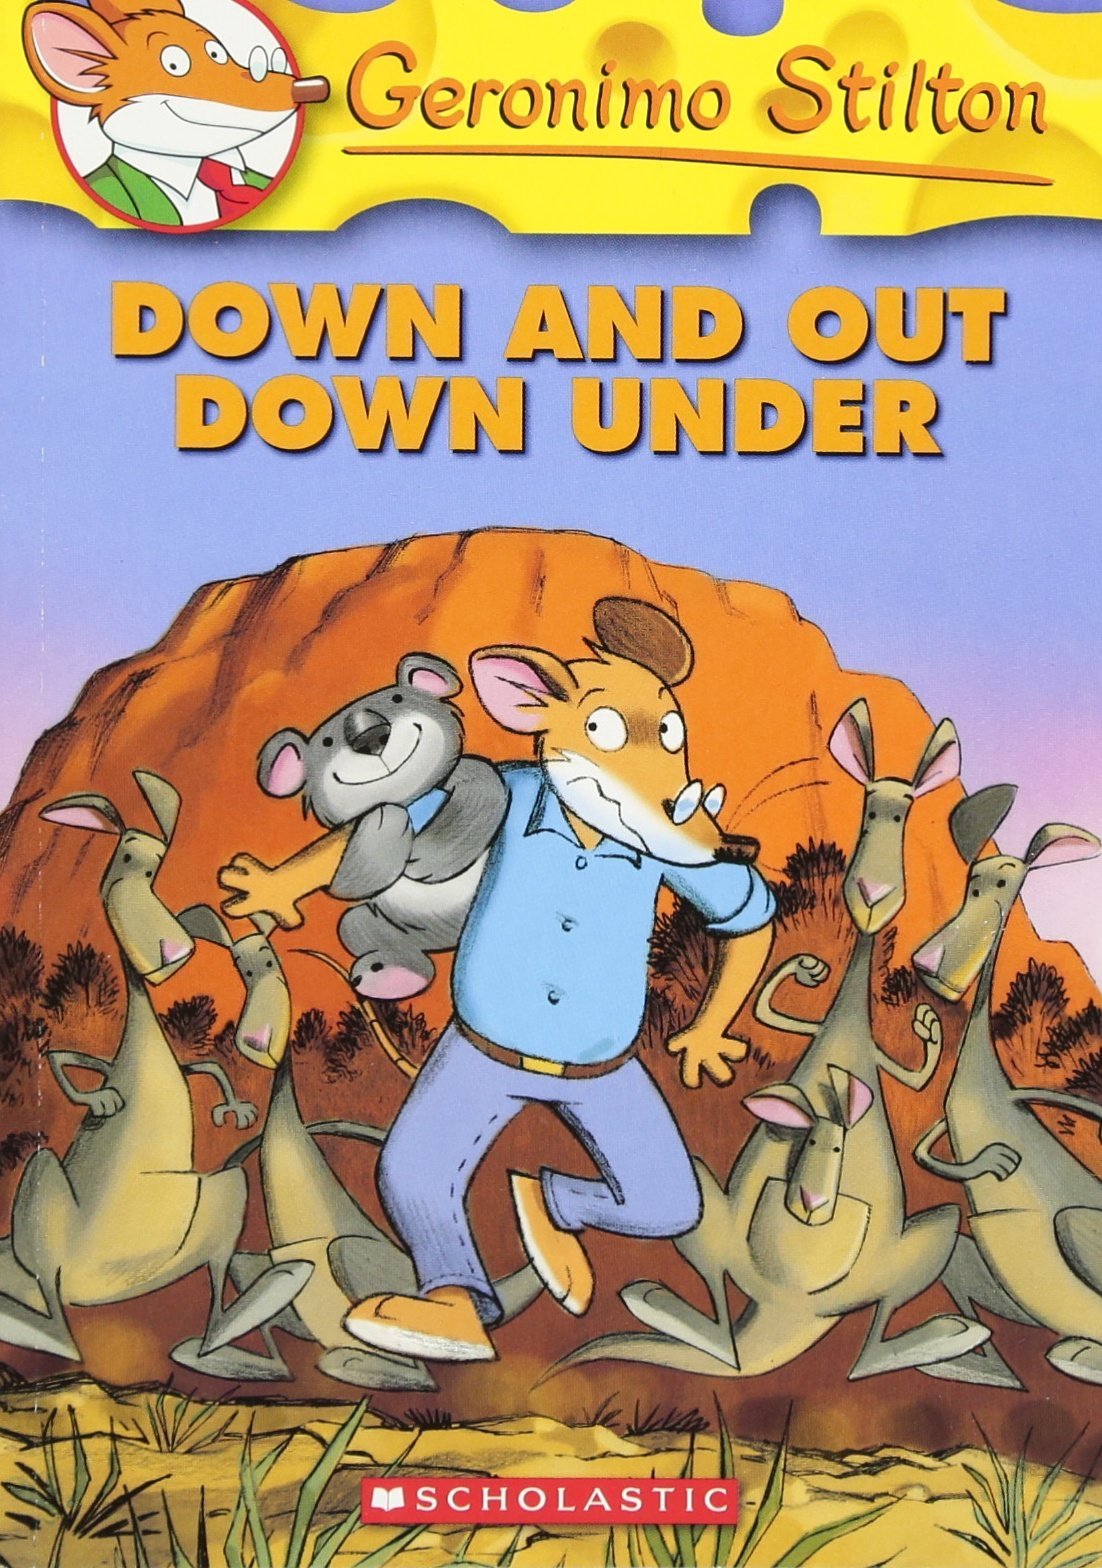 Geronimo Stilton: Down And Out Down Under #29